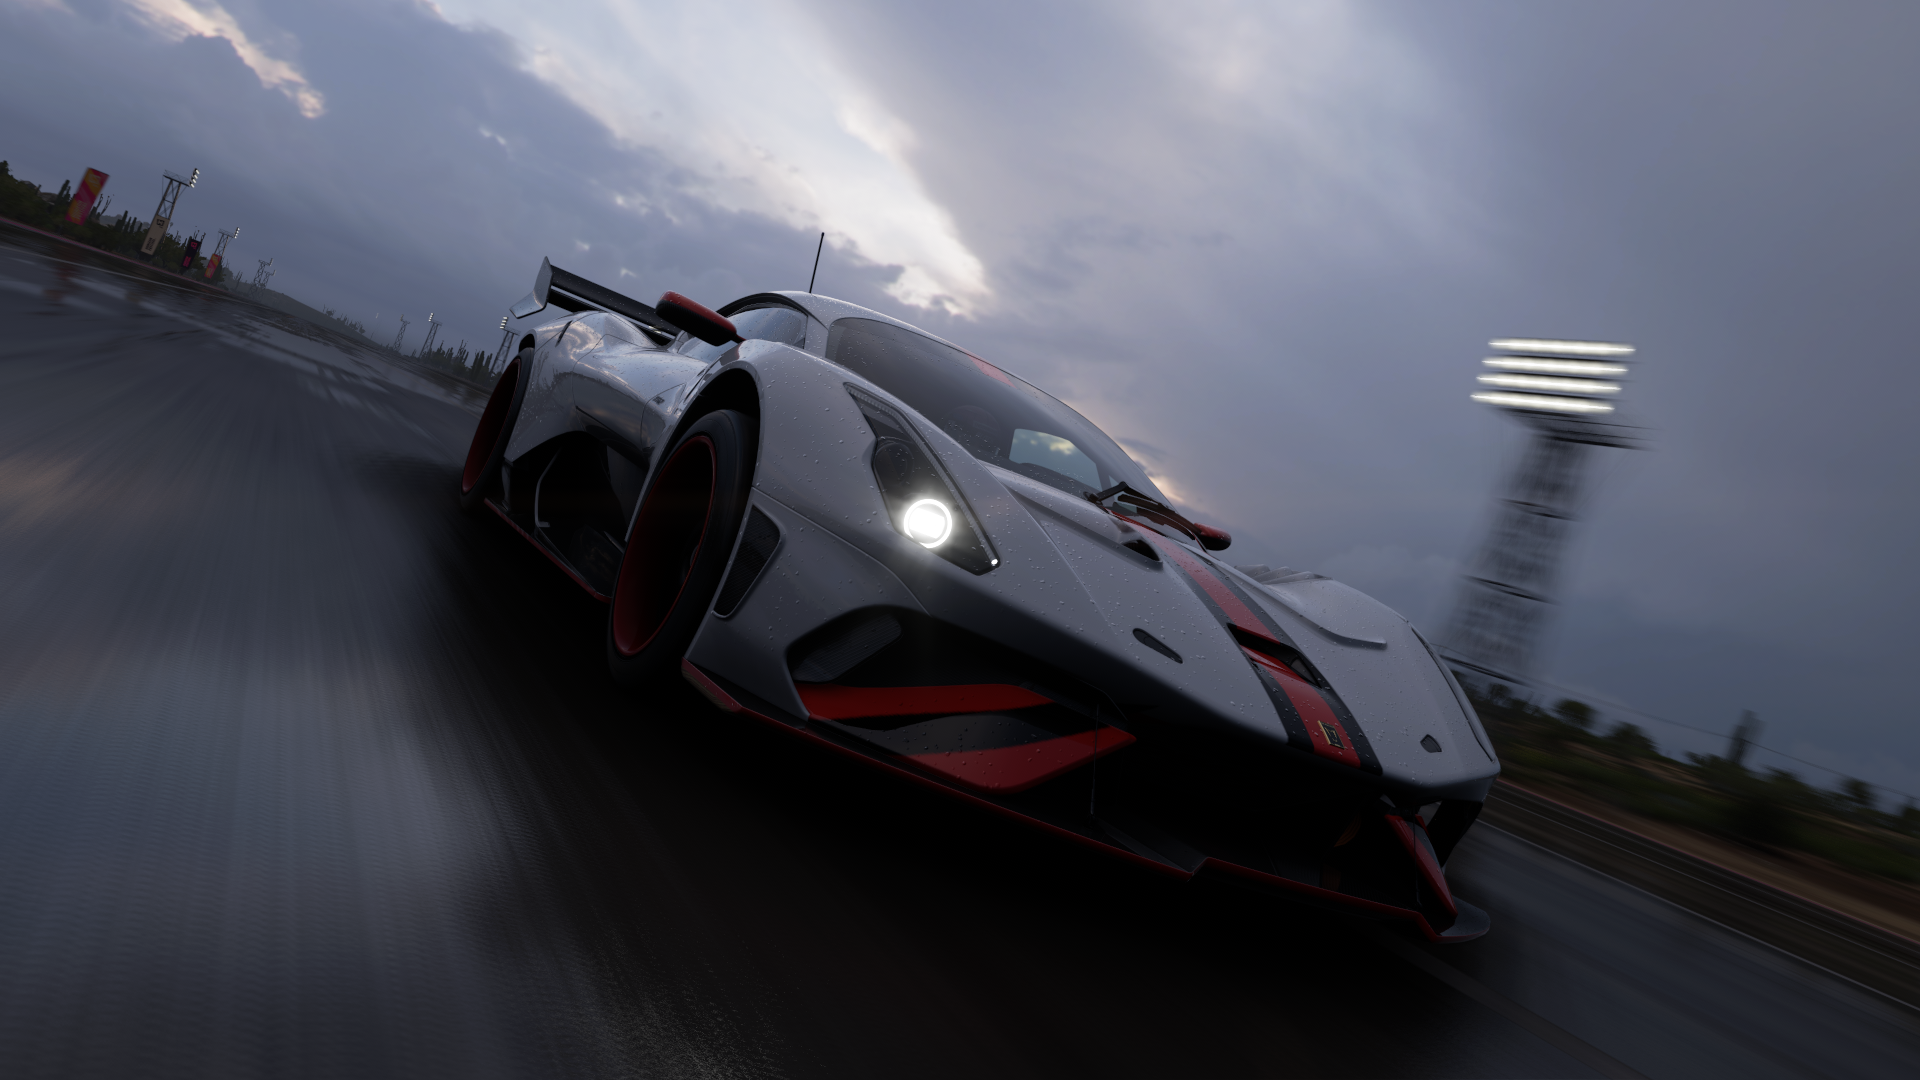 General 1920x1080 Forza Horizon 5 screen shot PC gaming Hypercar video games PlaygroundGames CGI frontal view vehicle car video game art clouds sky road headlights Hennessey Hennessey Venom F5 driving American cars